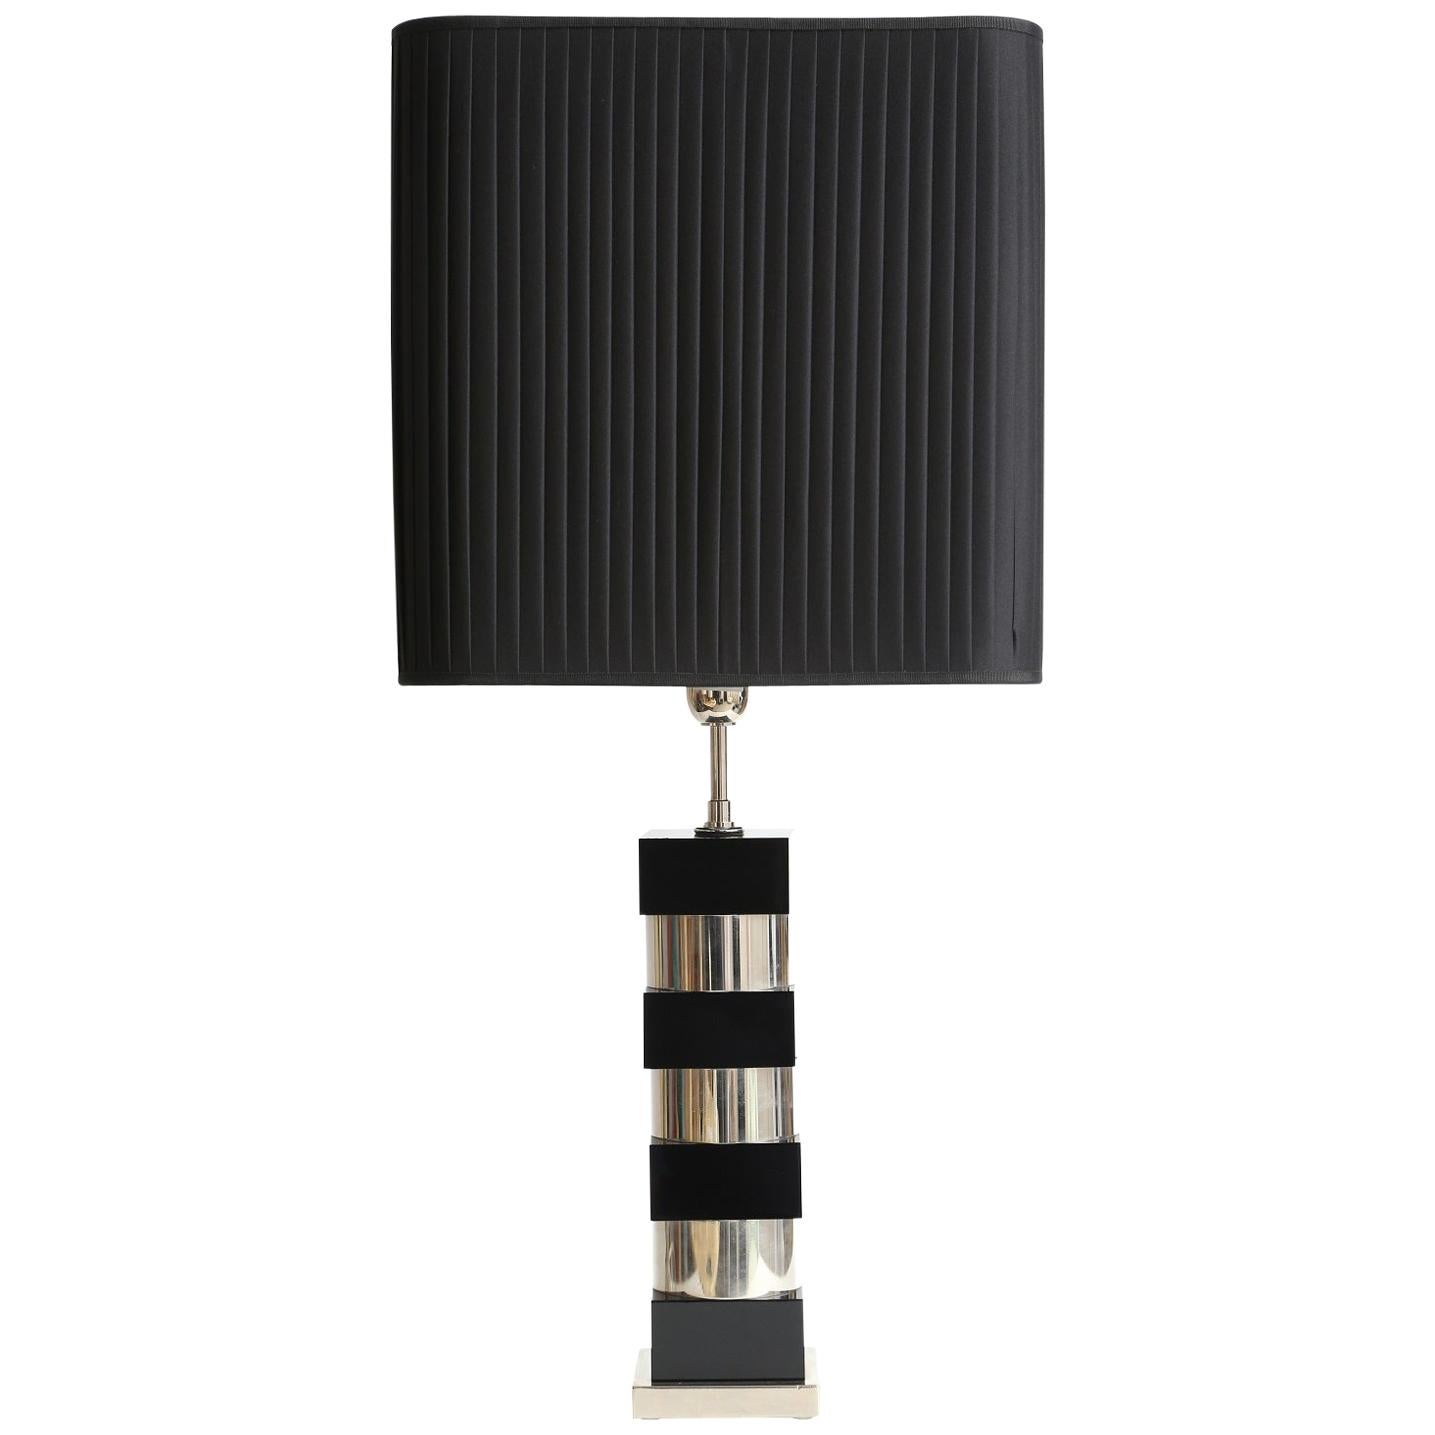 Grattacielo Lamp by Selezioni Domus, Made in Italy For Sale